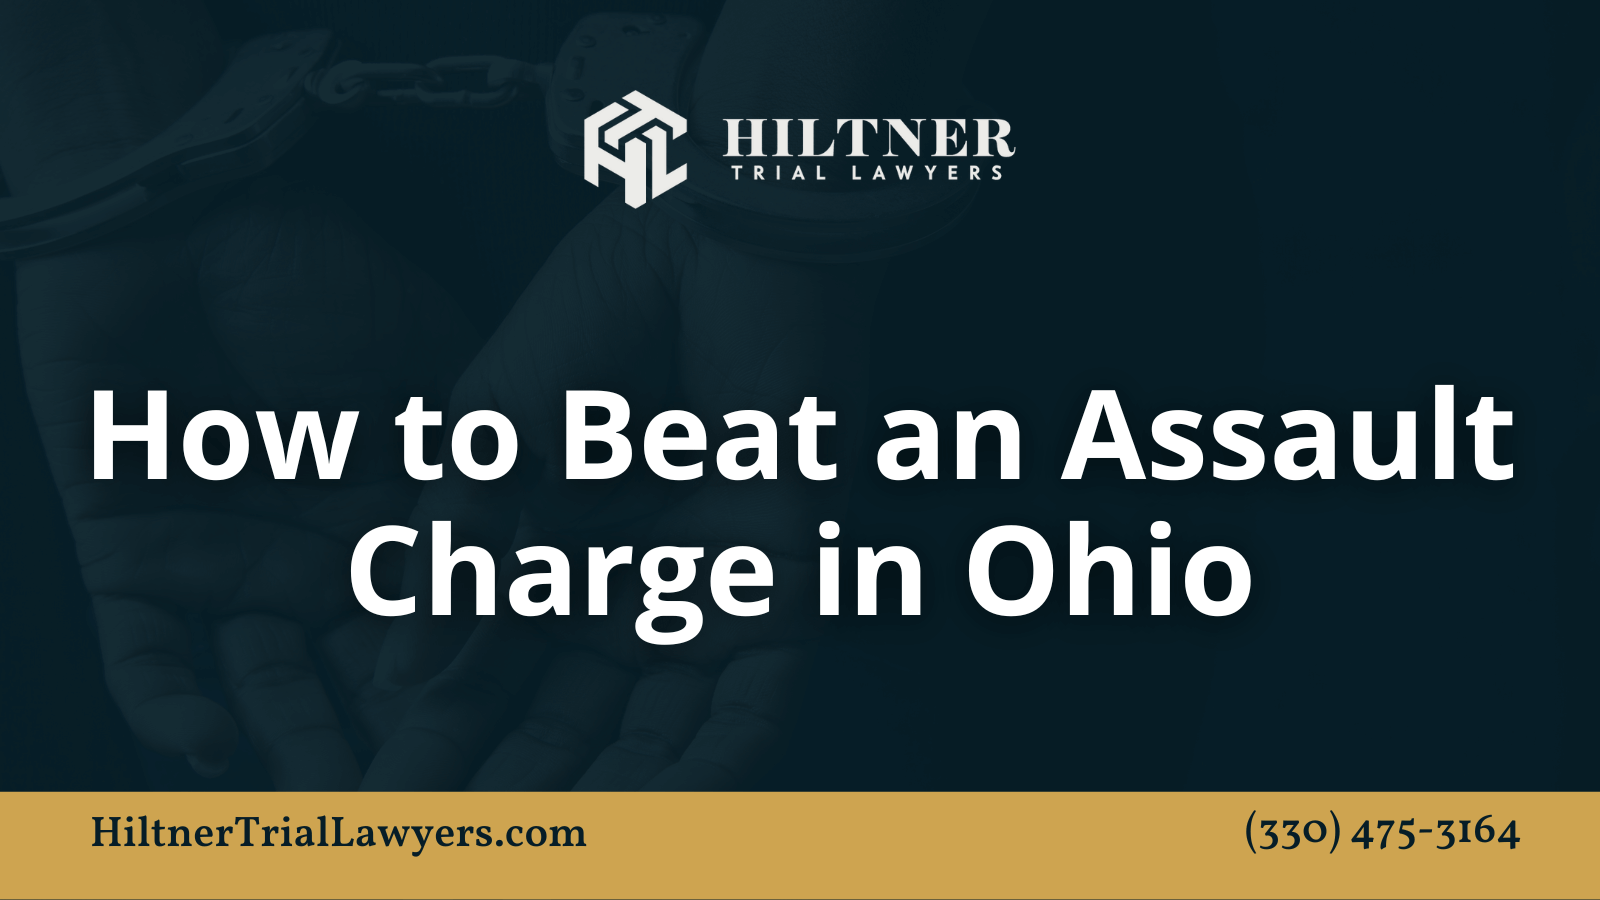 How to Beat an Assault Charge in Ohio - Hiltner Trial Lawyers Ohio - max hiltner